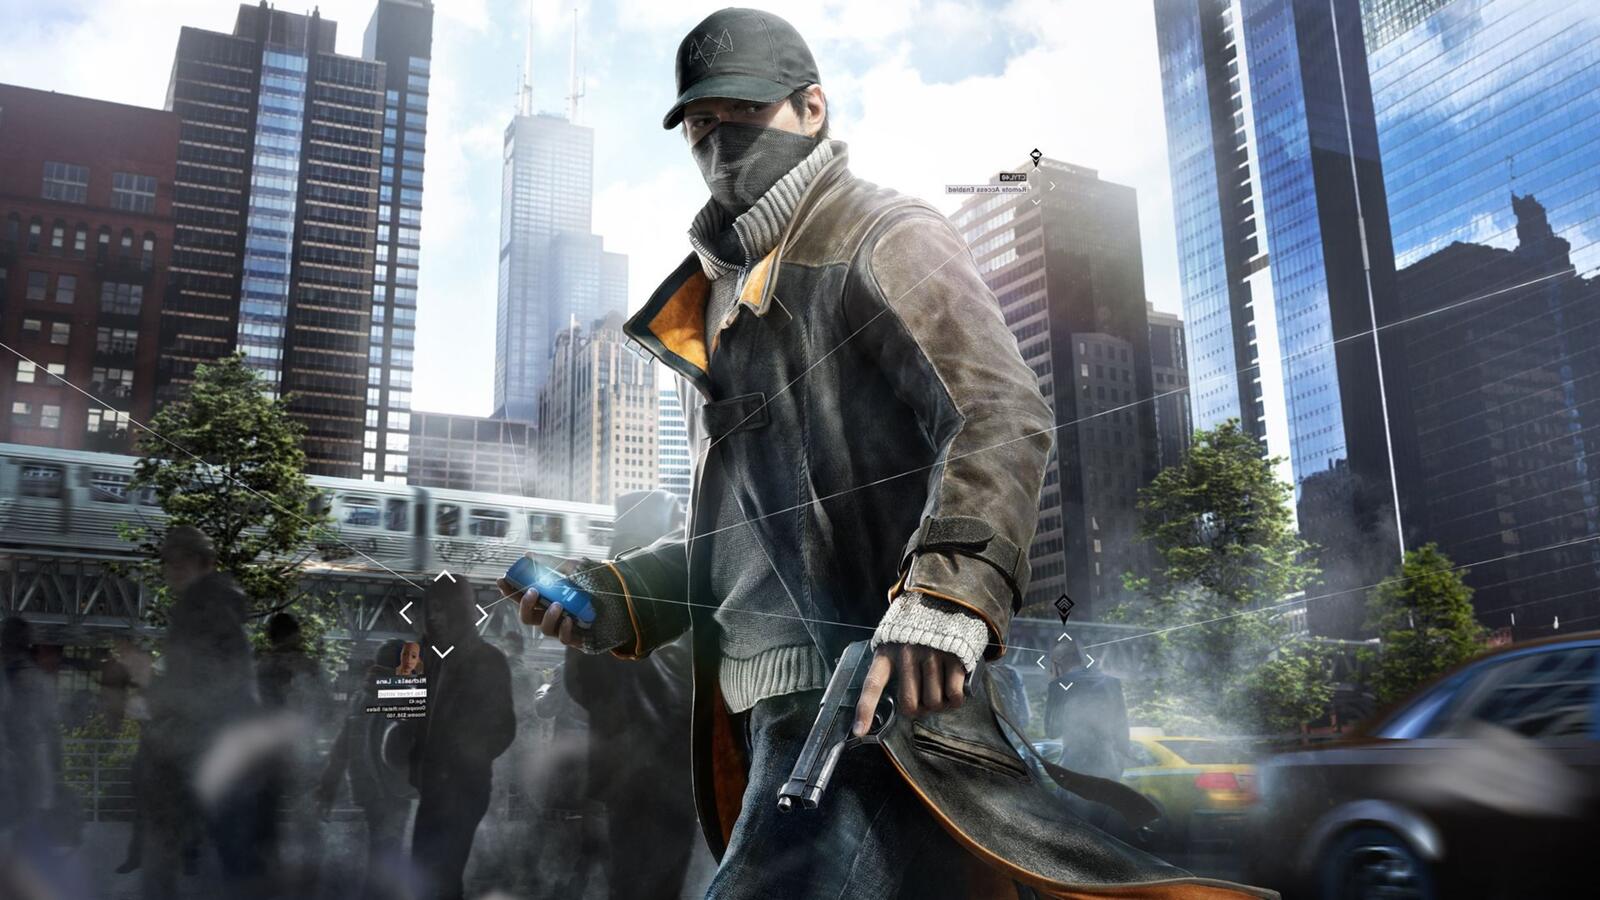 Wallpapers Xbox games computer games Watch Dogs 2 on the desktop